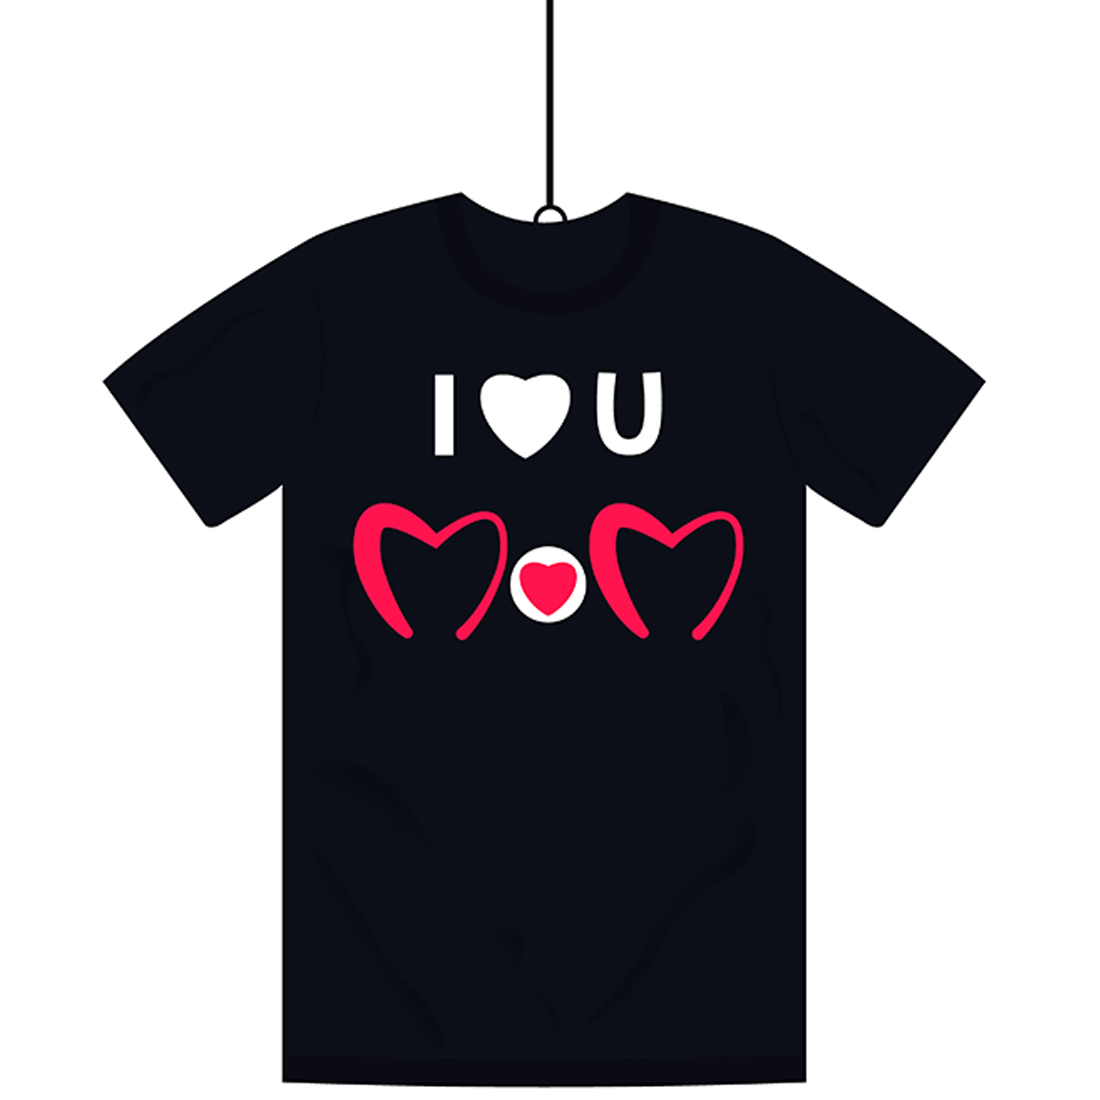 I Love You Mom Happy Mothers Day T-shirt design with heart shape preview image.